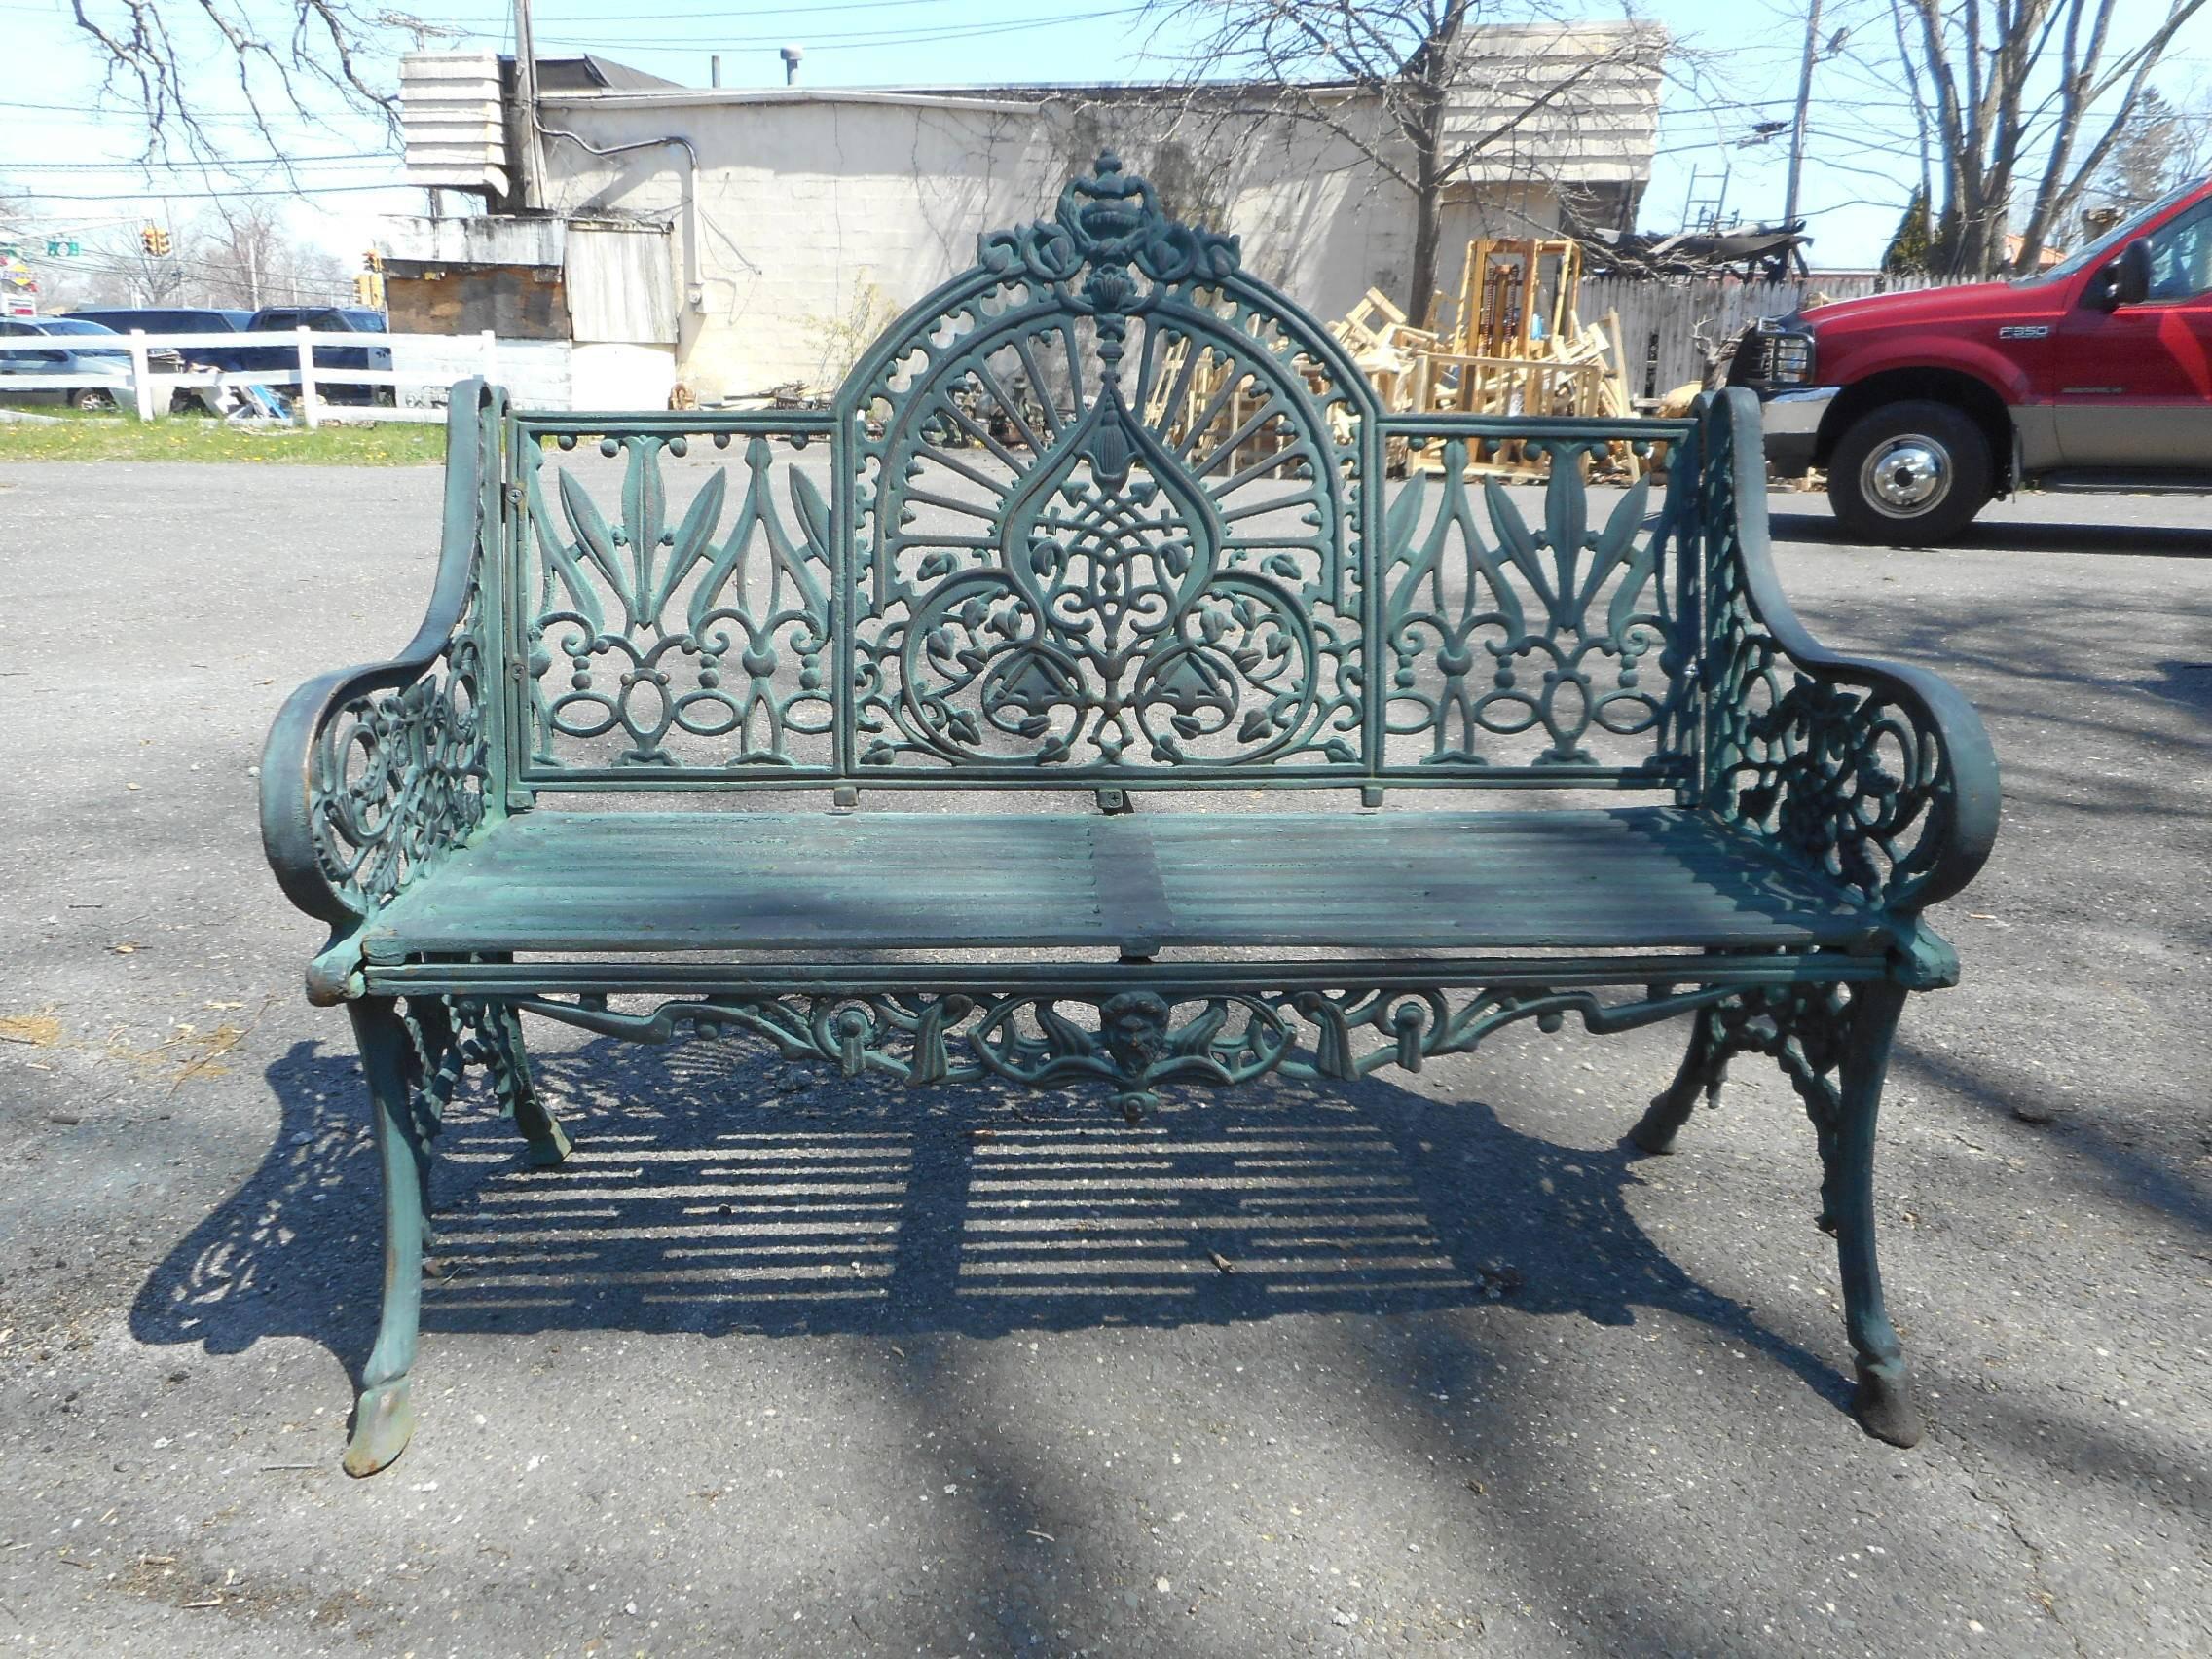 This beautiful cast iron bench features sculpted arm rests, an arched backrest, and a slatted seat. A unique and comfortable design with excellent detail throughout. Splayed legs and a decorative backrest make this piece the perfect addition to any